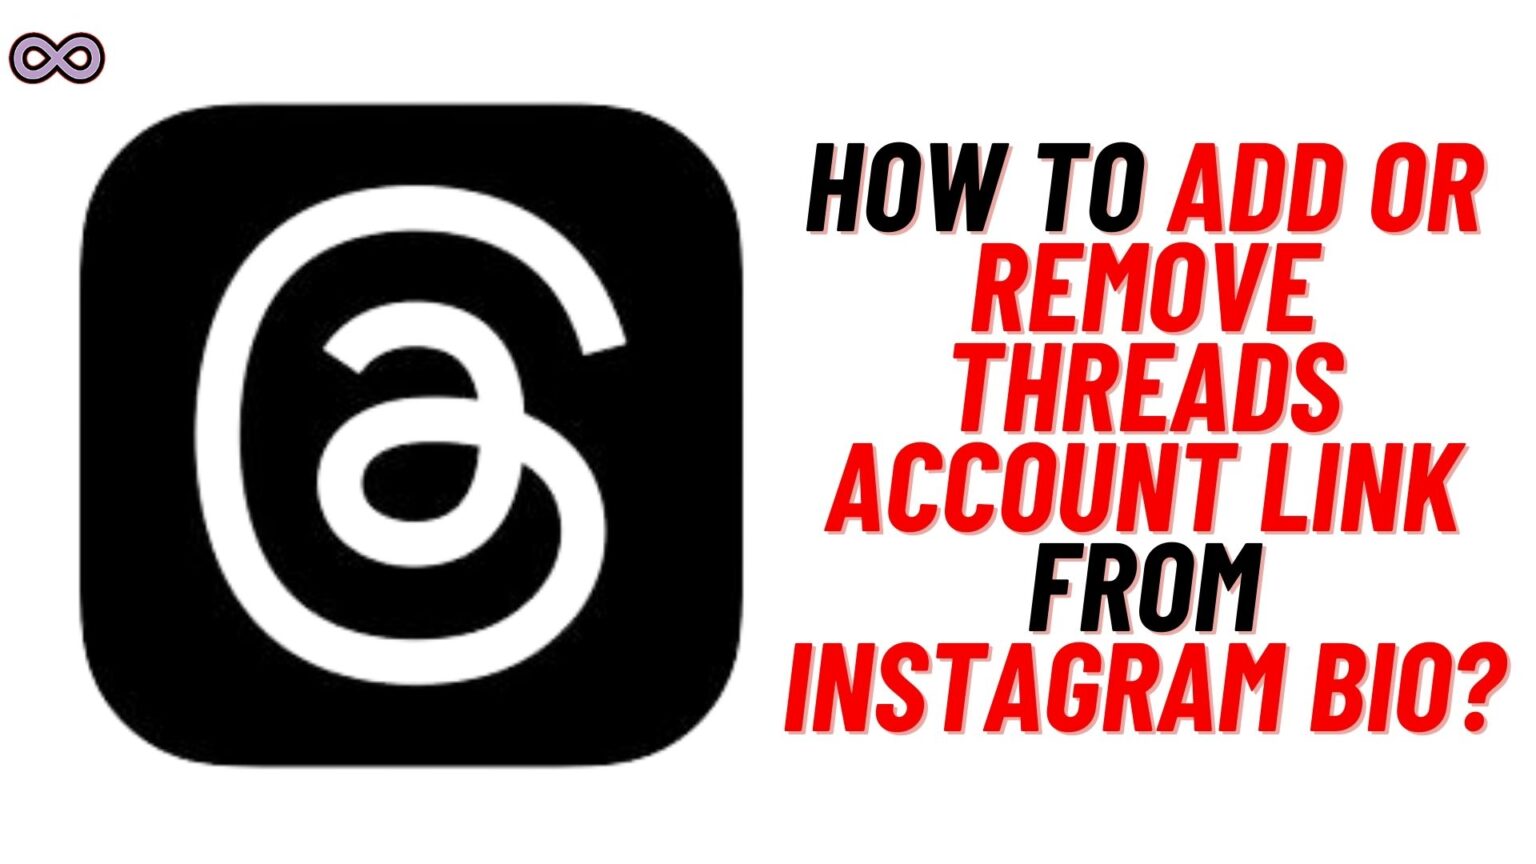 How to Add Threads Account to Instagram Bio